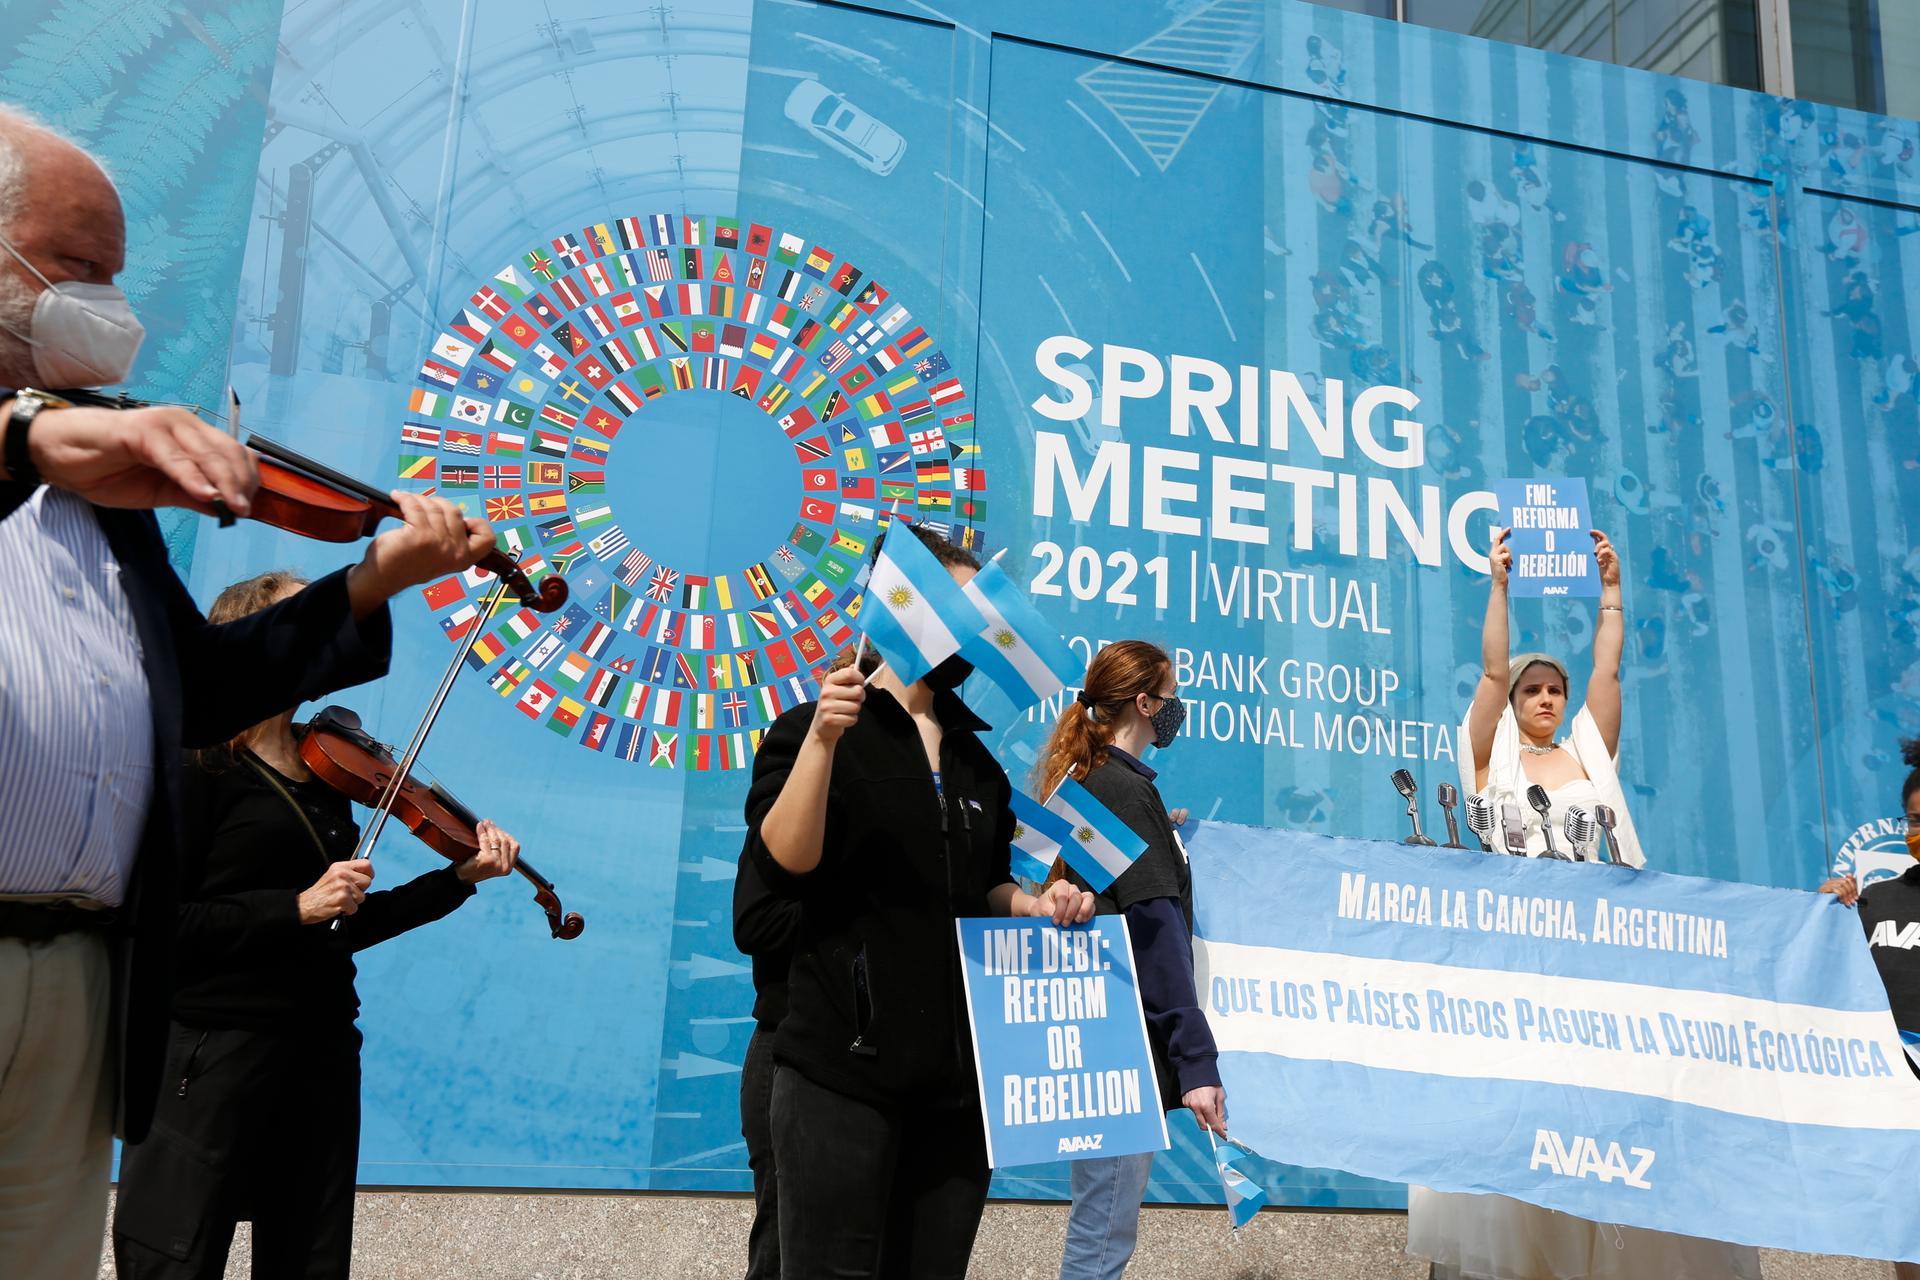 At the entrance of the International Monetary Fund (IMF) Headquarters, an Avaaz.org activist dressed as Eva Peron — also known as Evita — sings "Don't feed the greed Kristalina," an adaptation of "Don't cry for me Argentina" from the hit musical "Evita,"